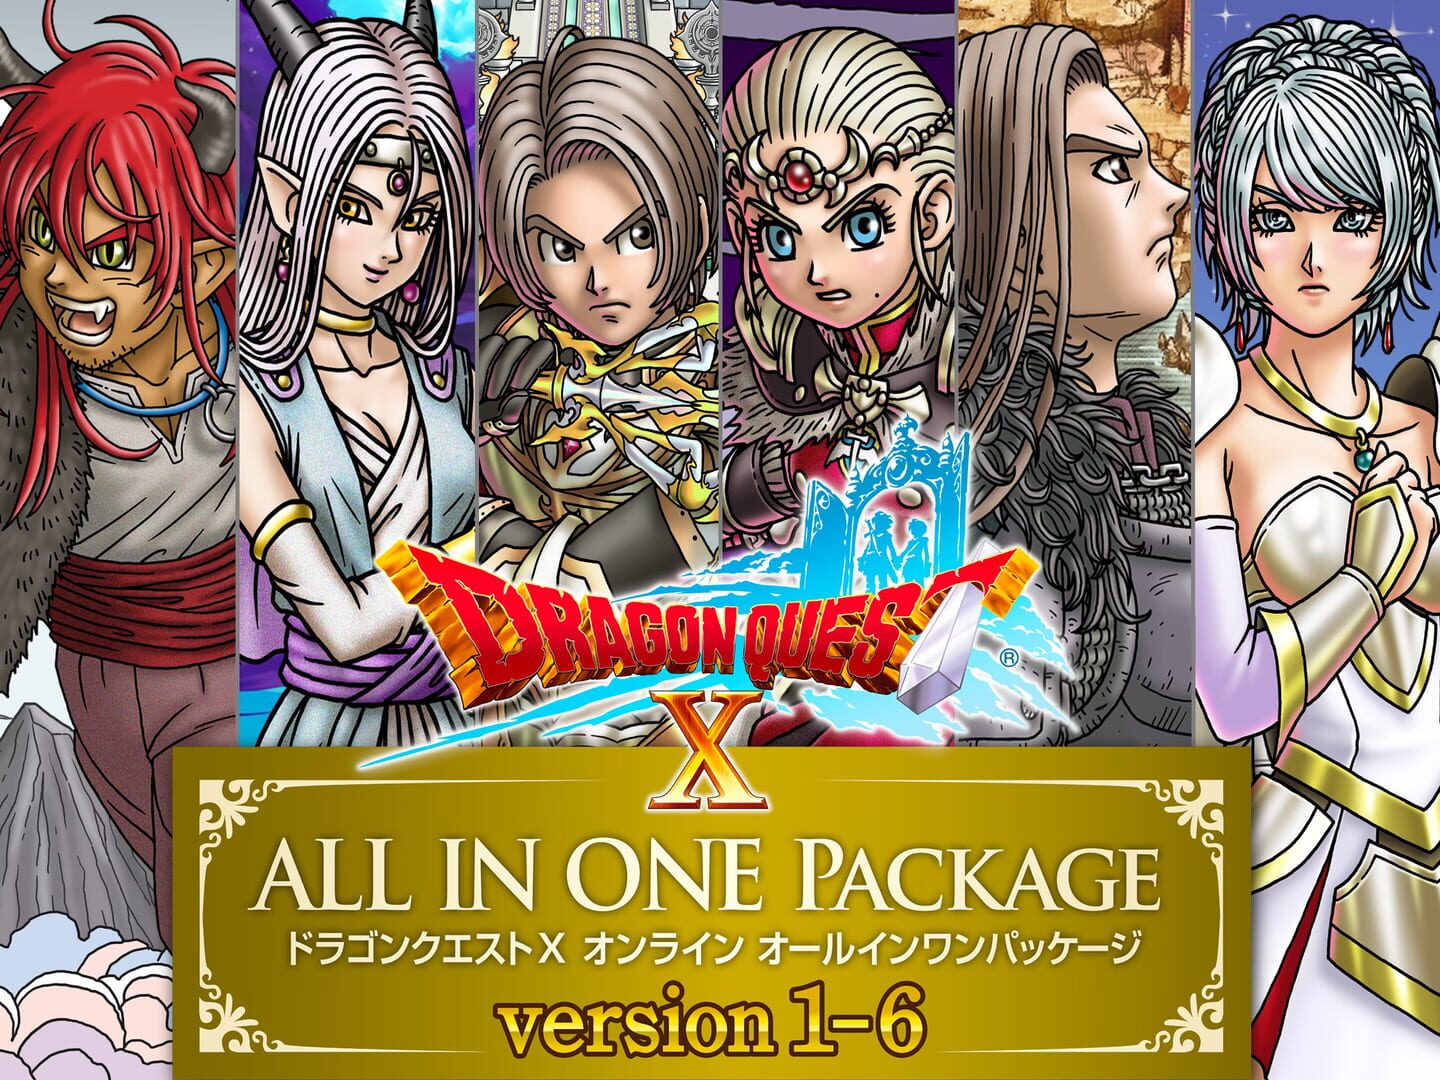 Captura de pantalla - Dragon Quest X: All In One Package - Versions 1-6